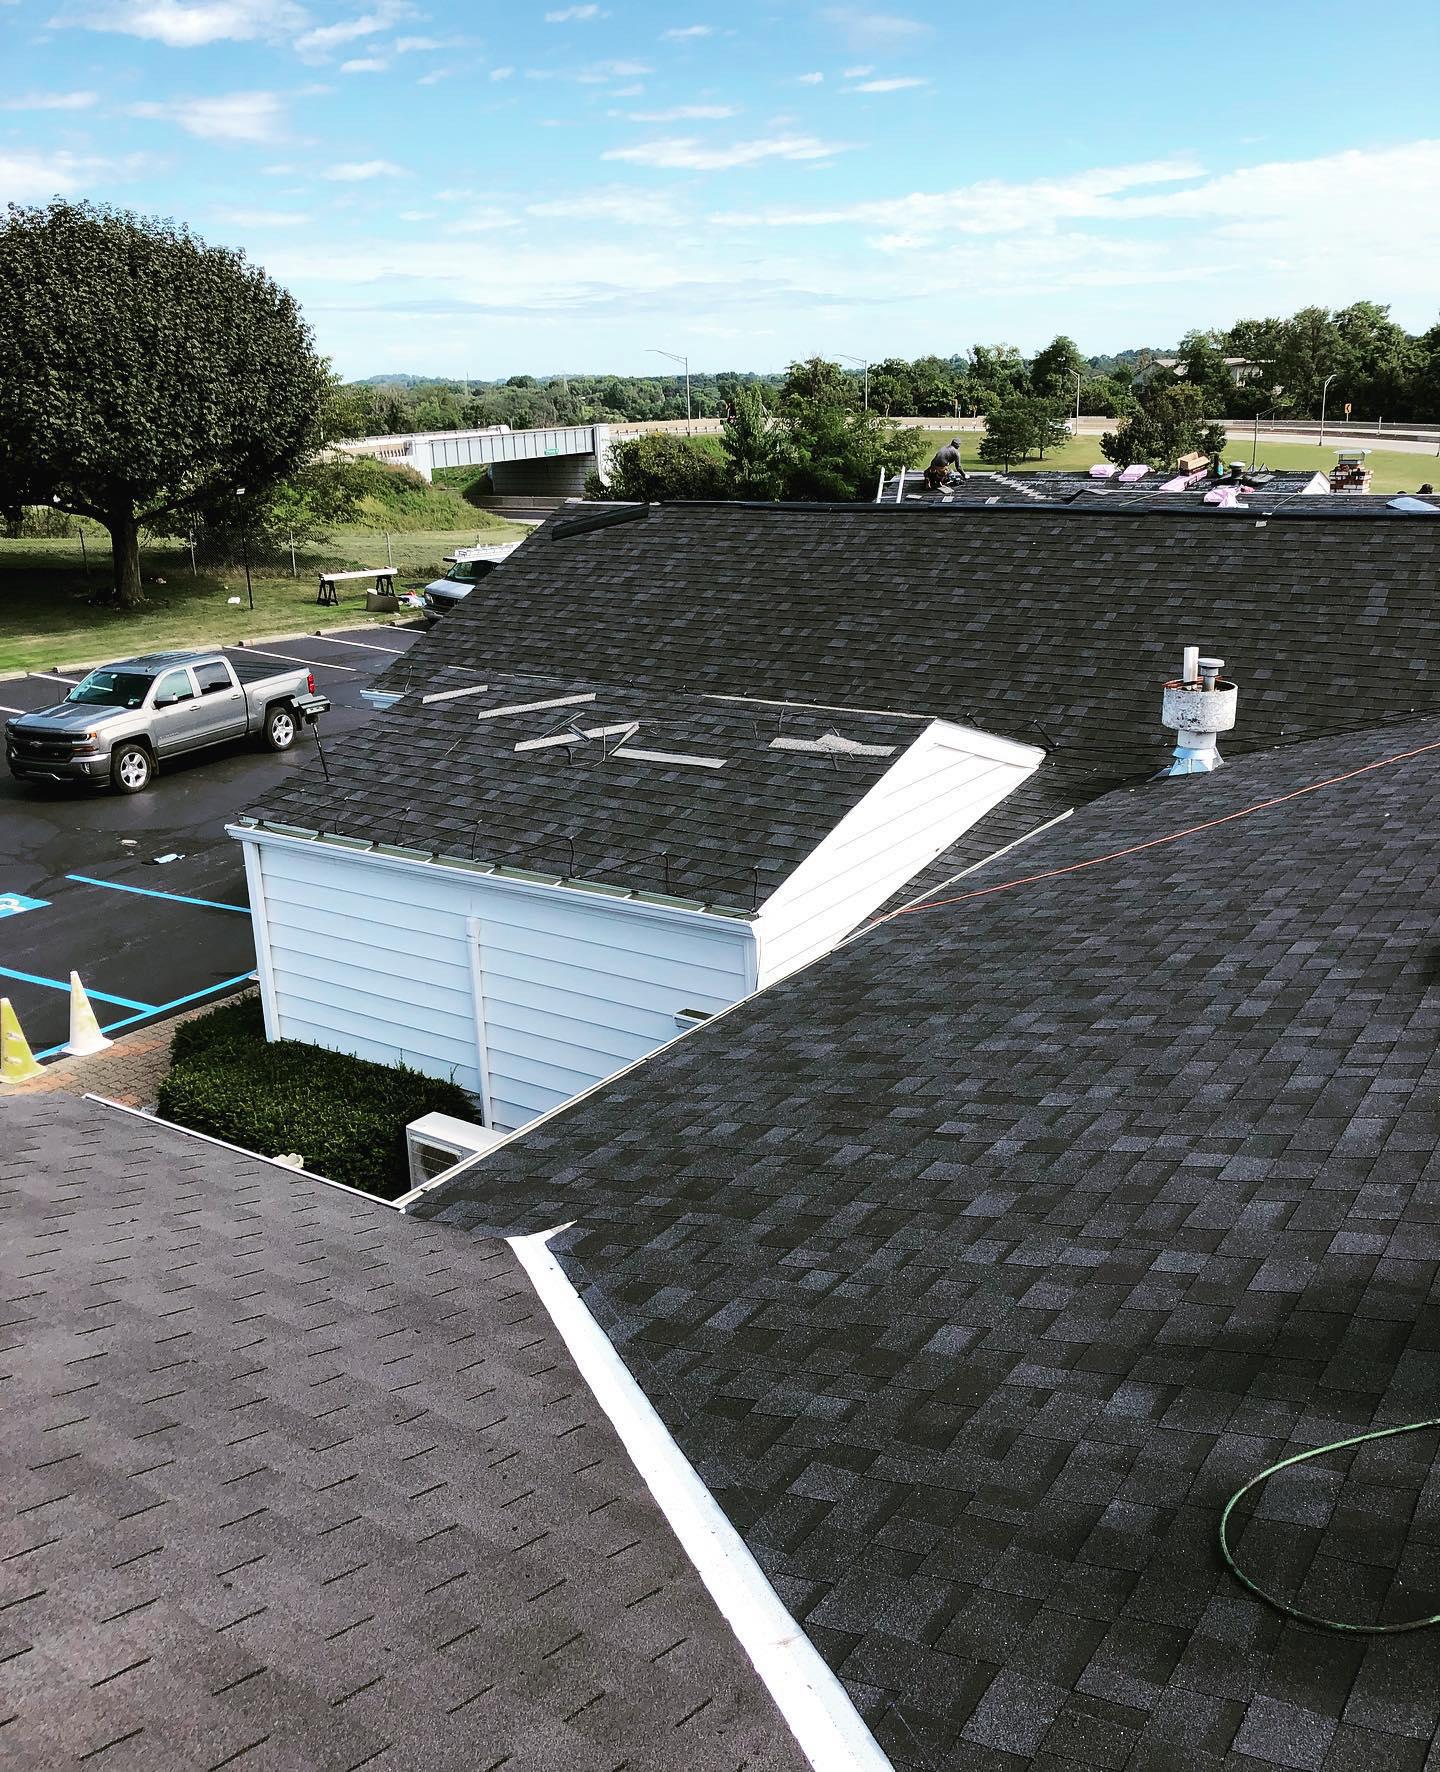 Schultheis Bros. Heating, Cooling & Roofing Westmoreland Photo